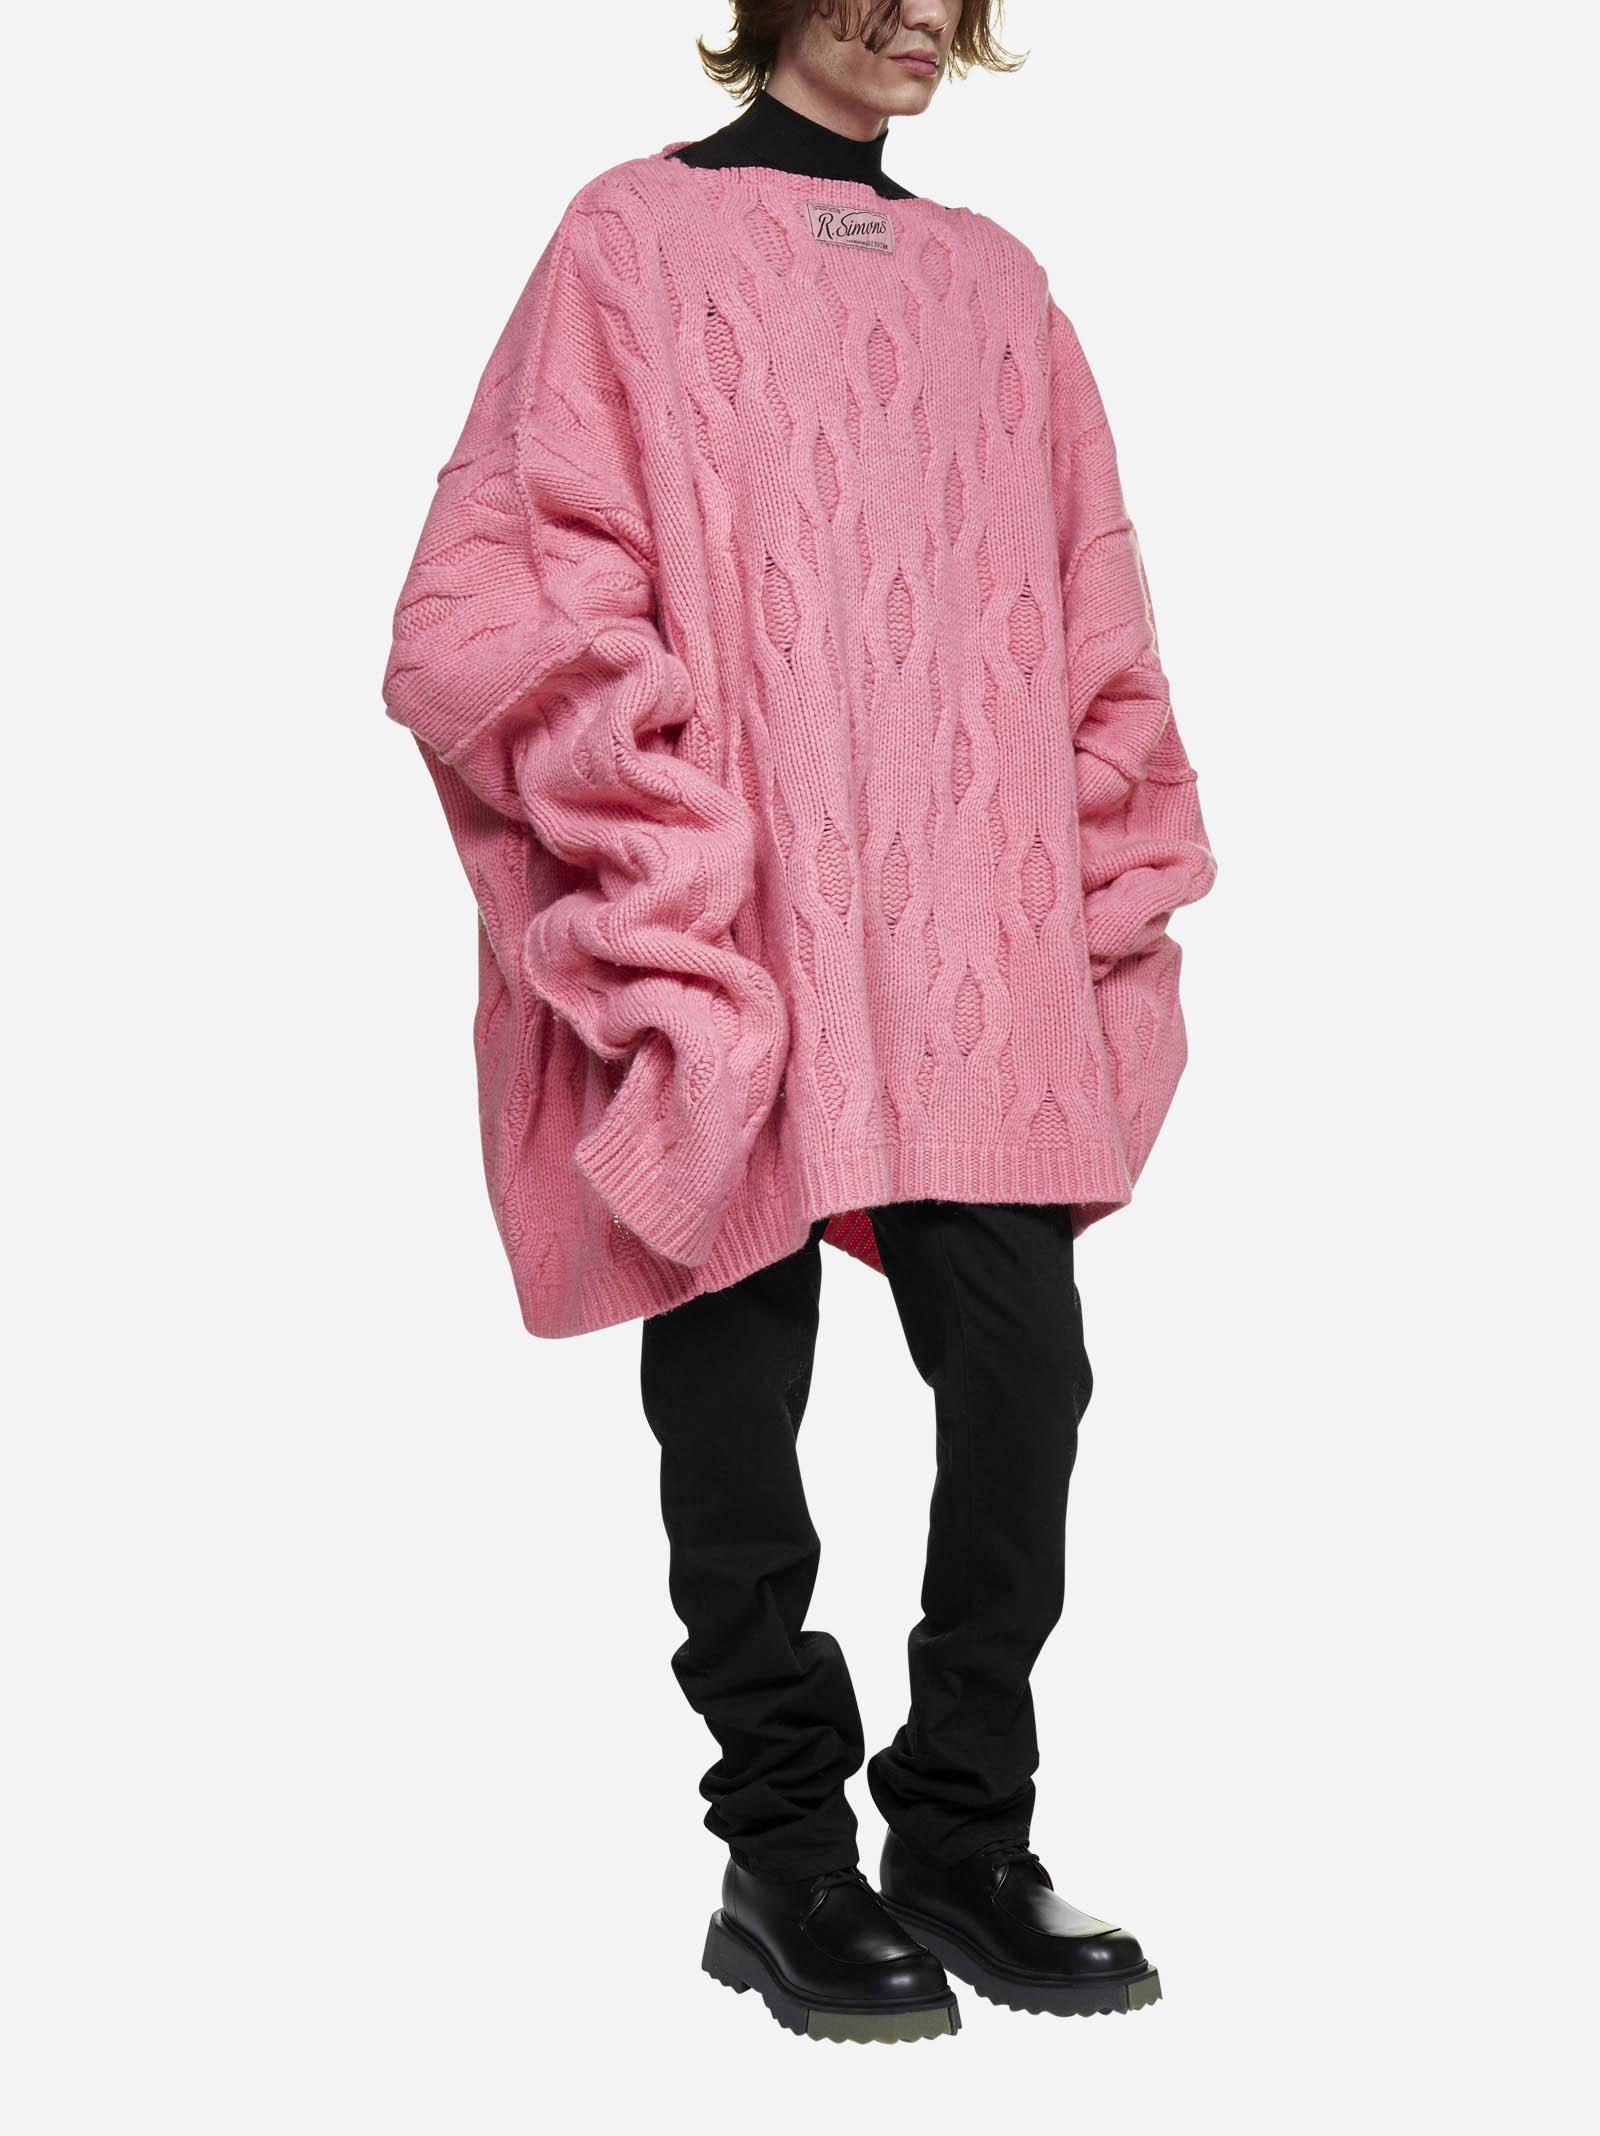 Raf Simons Men's Pink Oversized Cable-knit Mohair Sweater